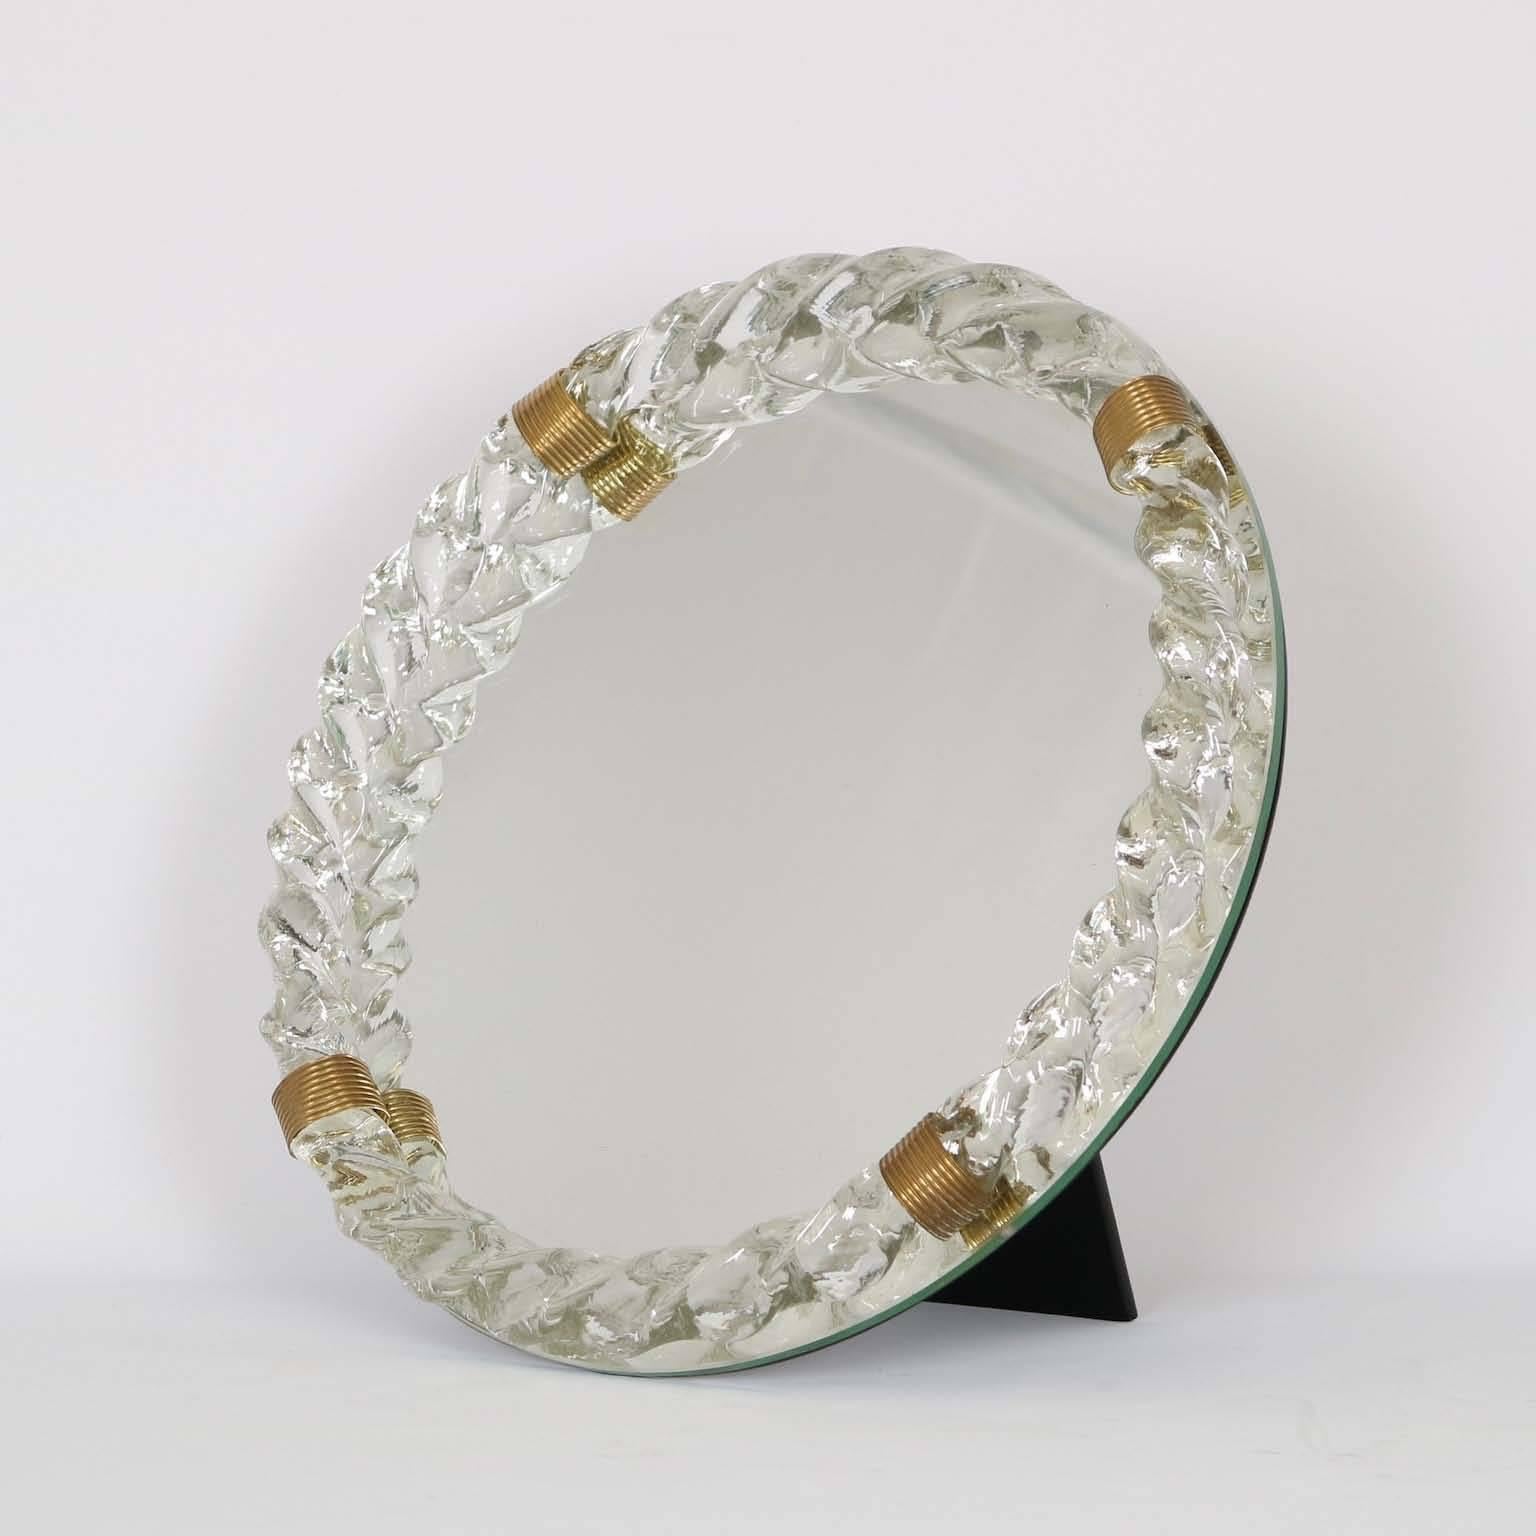 An Italian round table top mirror, design attributed to Gio Ponti, produced circa 1930s-1940s, with Murano glass twisted frame by Venini, accented with brass bands, against ebonized wood. Very good vintage condition, wear consistent with age and use.